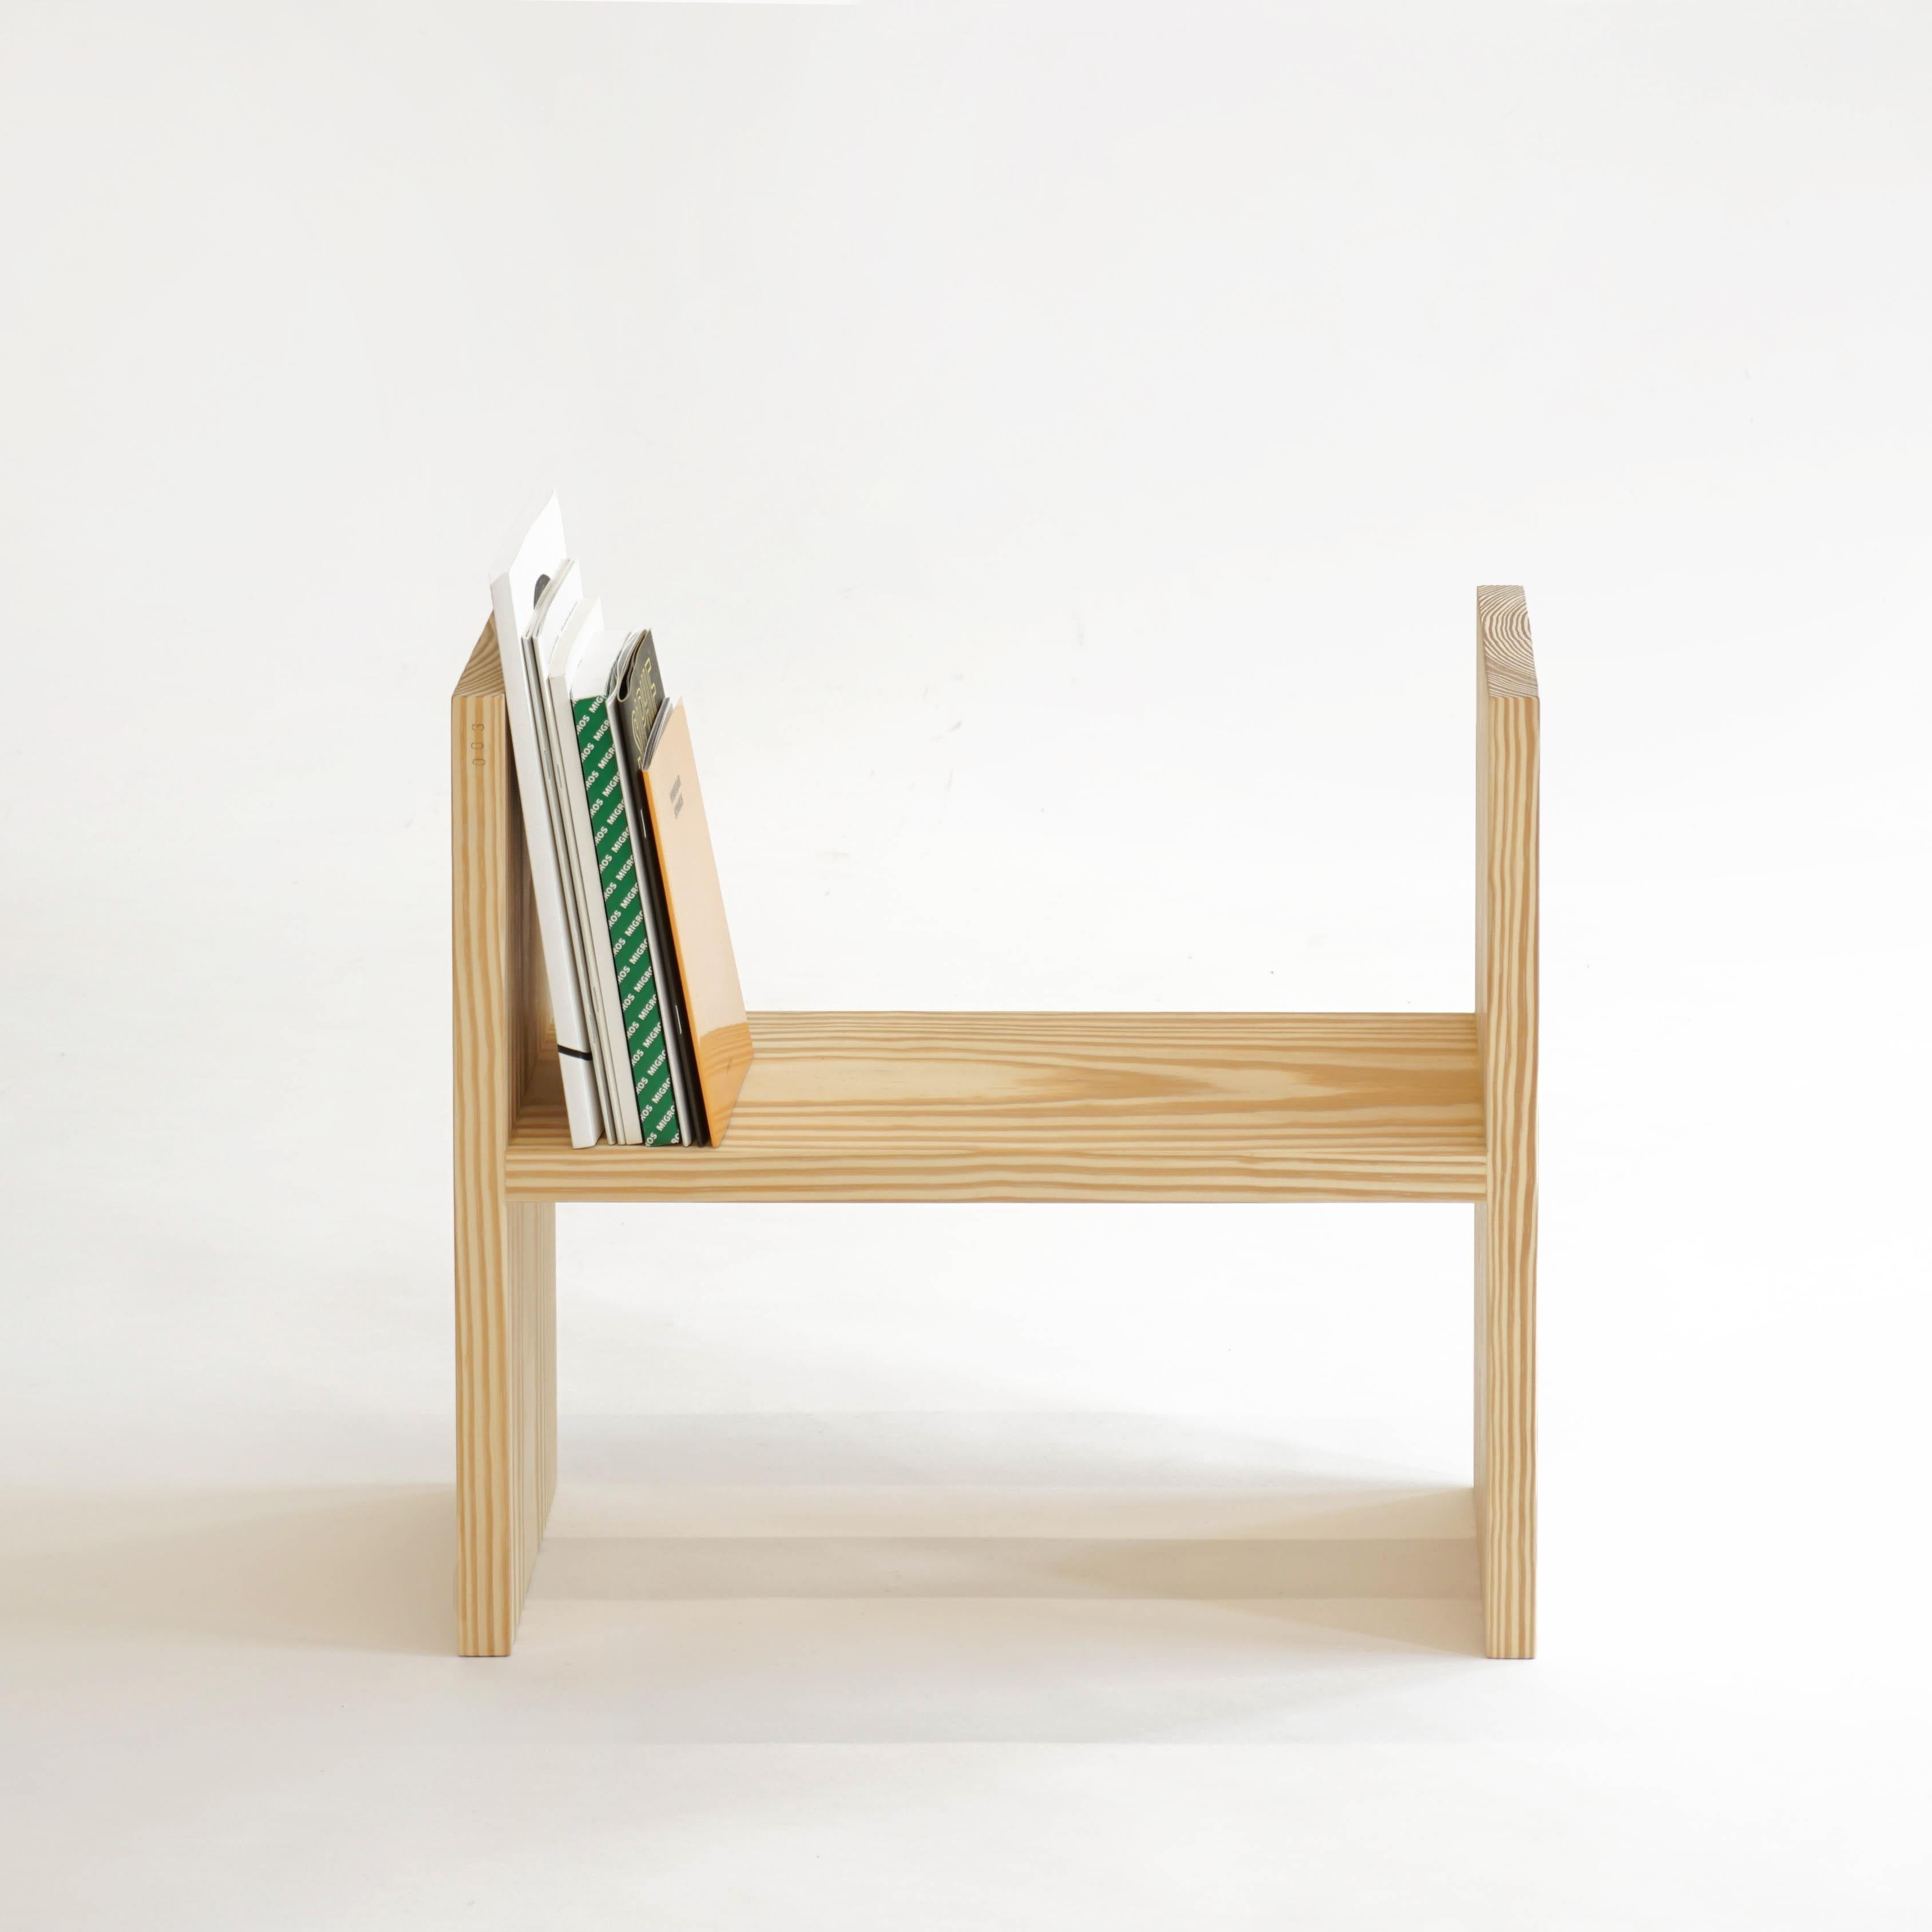 'Alexa' is a multifunctional furniture piece that can serve as a small bookshelf or a side table with just 1 turn. It is part of the furniture series 'Wolo' by Belgian artist Sophie Nys for Brussels gallery MANIERA. It is made from yellow pine and